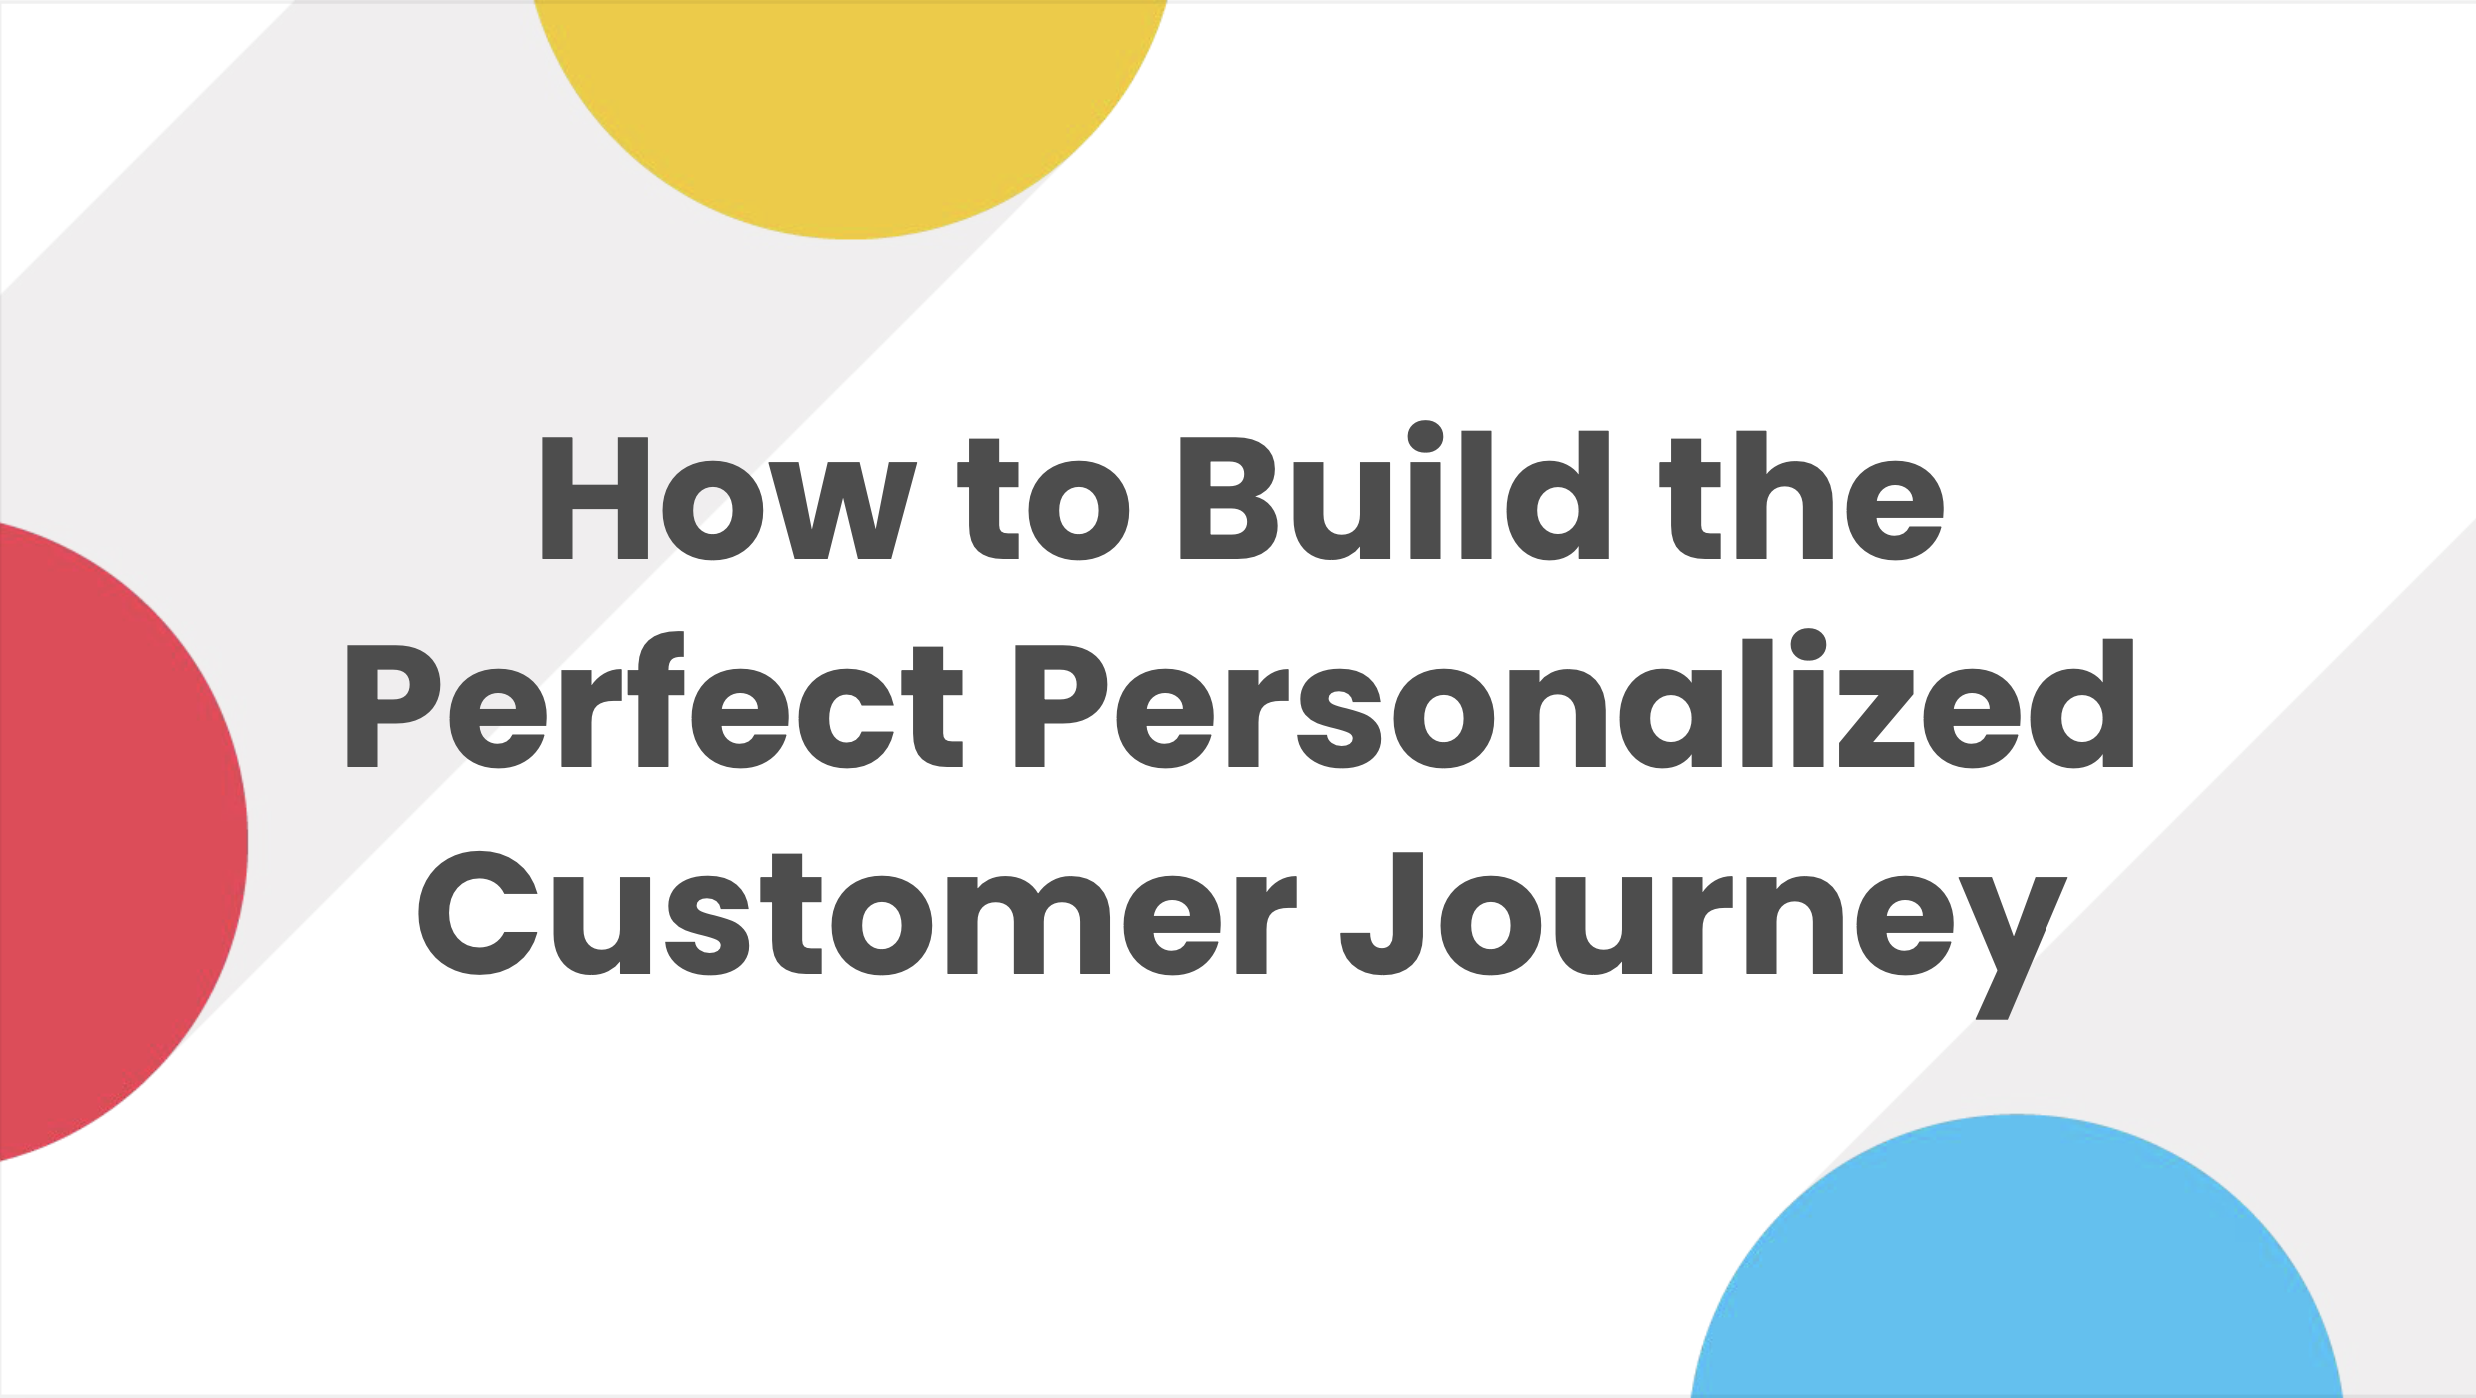 Live Walkthrough: How to Build the Perfect Personalized Customer Journey